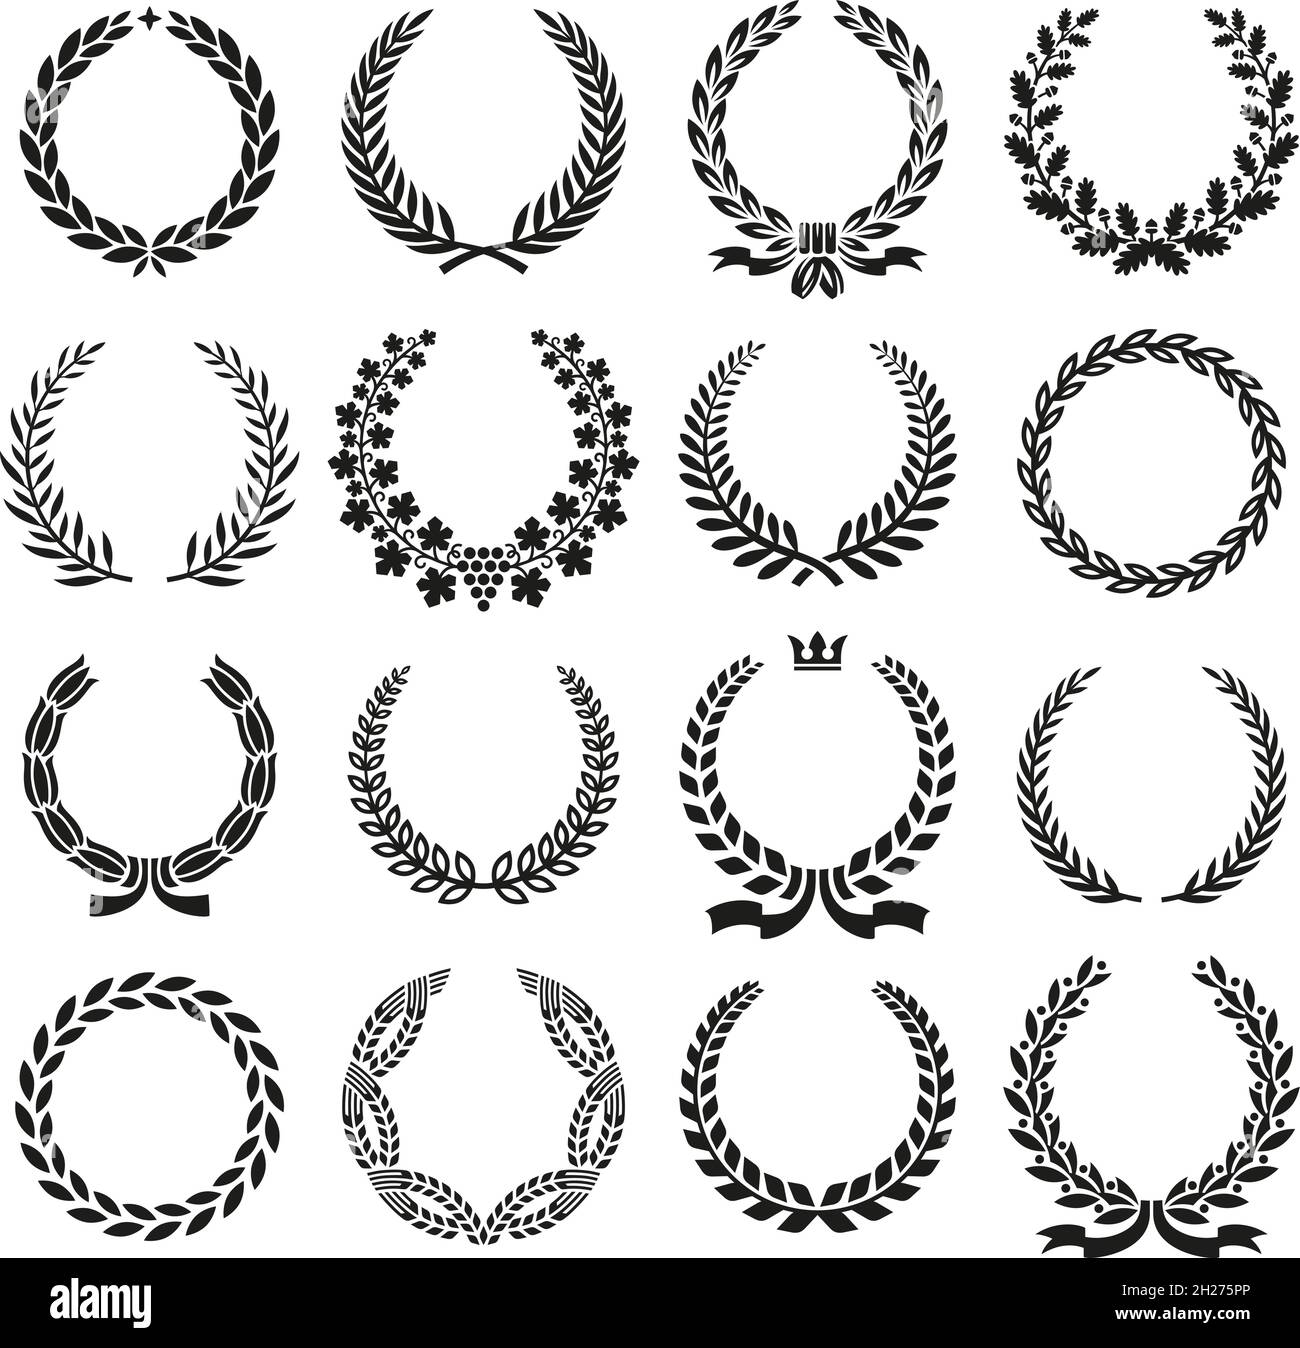 Laurel wreaths. Crest wreath, laurels leaves on branches. Winner icons, victory award logos. Greek branching circle medal tidy vector emblems Stock Vector